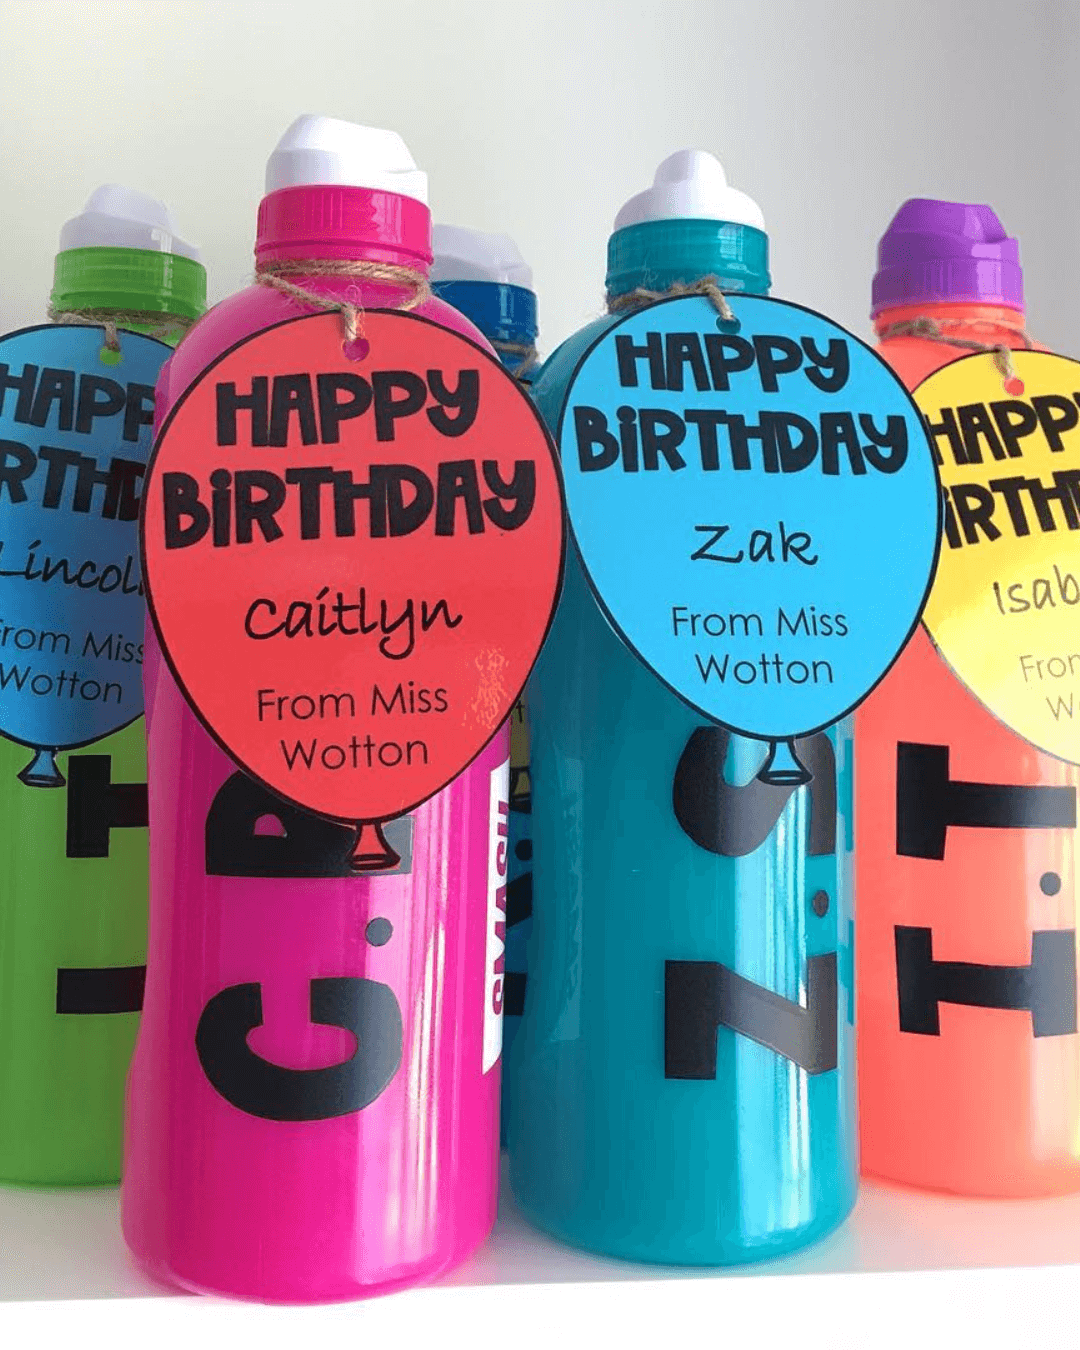 The left image shows the happy birthday balloon labels,  affixed to customised colourful drink bottles. The right-hand image shows the same balloons tied to small plushie toys including a leopard, a duck and a pig.” style=